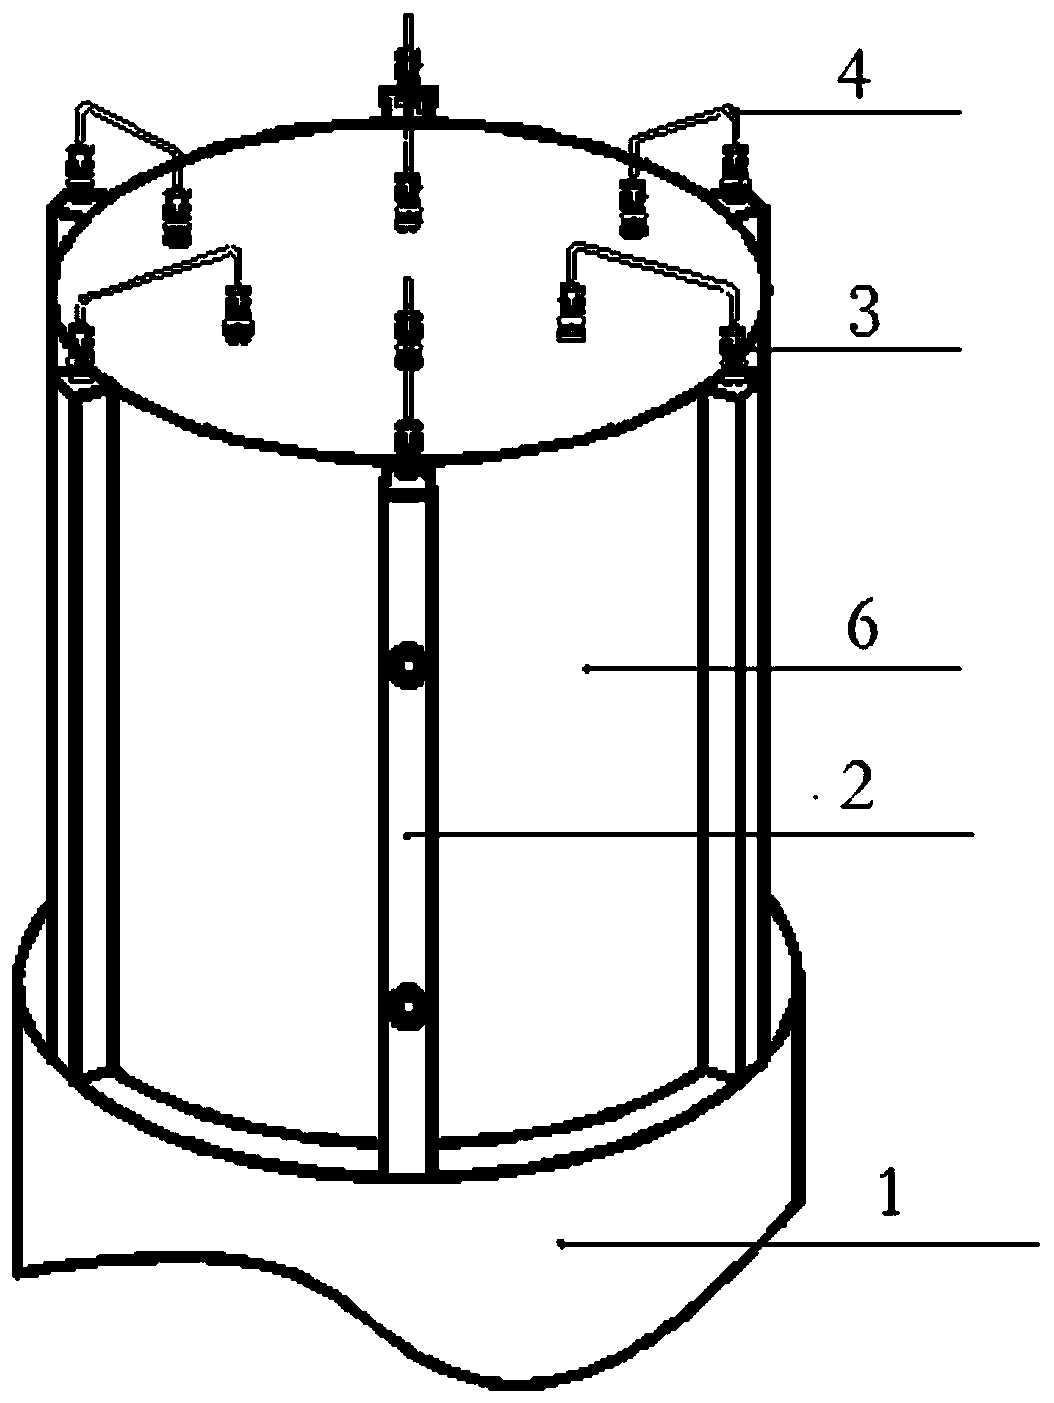 A Modular Embedded Cylindrical Conformal Acoustic Array for Mine